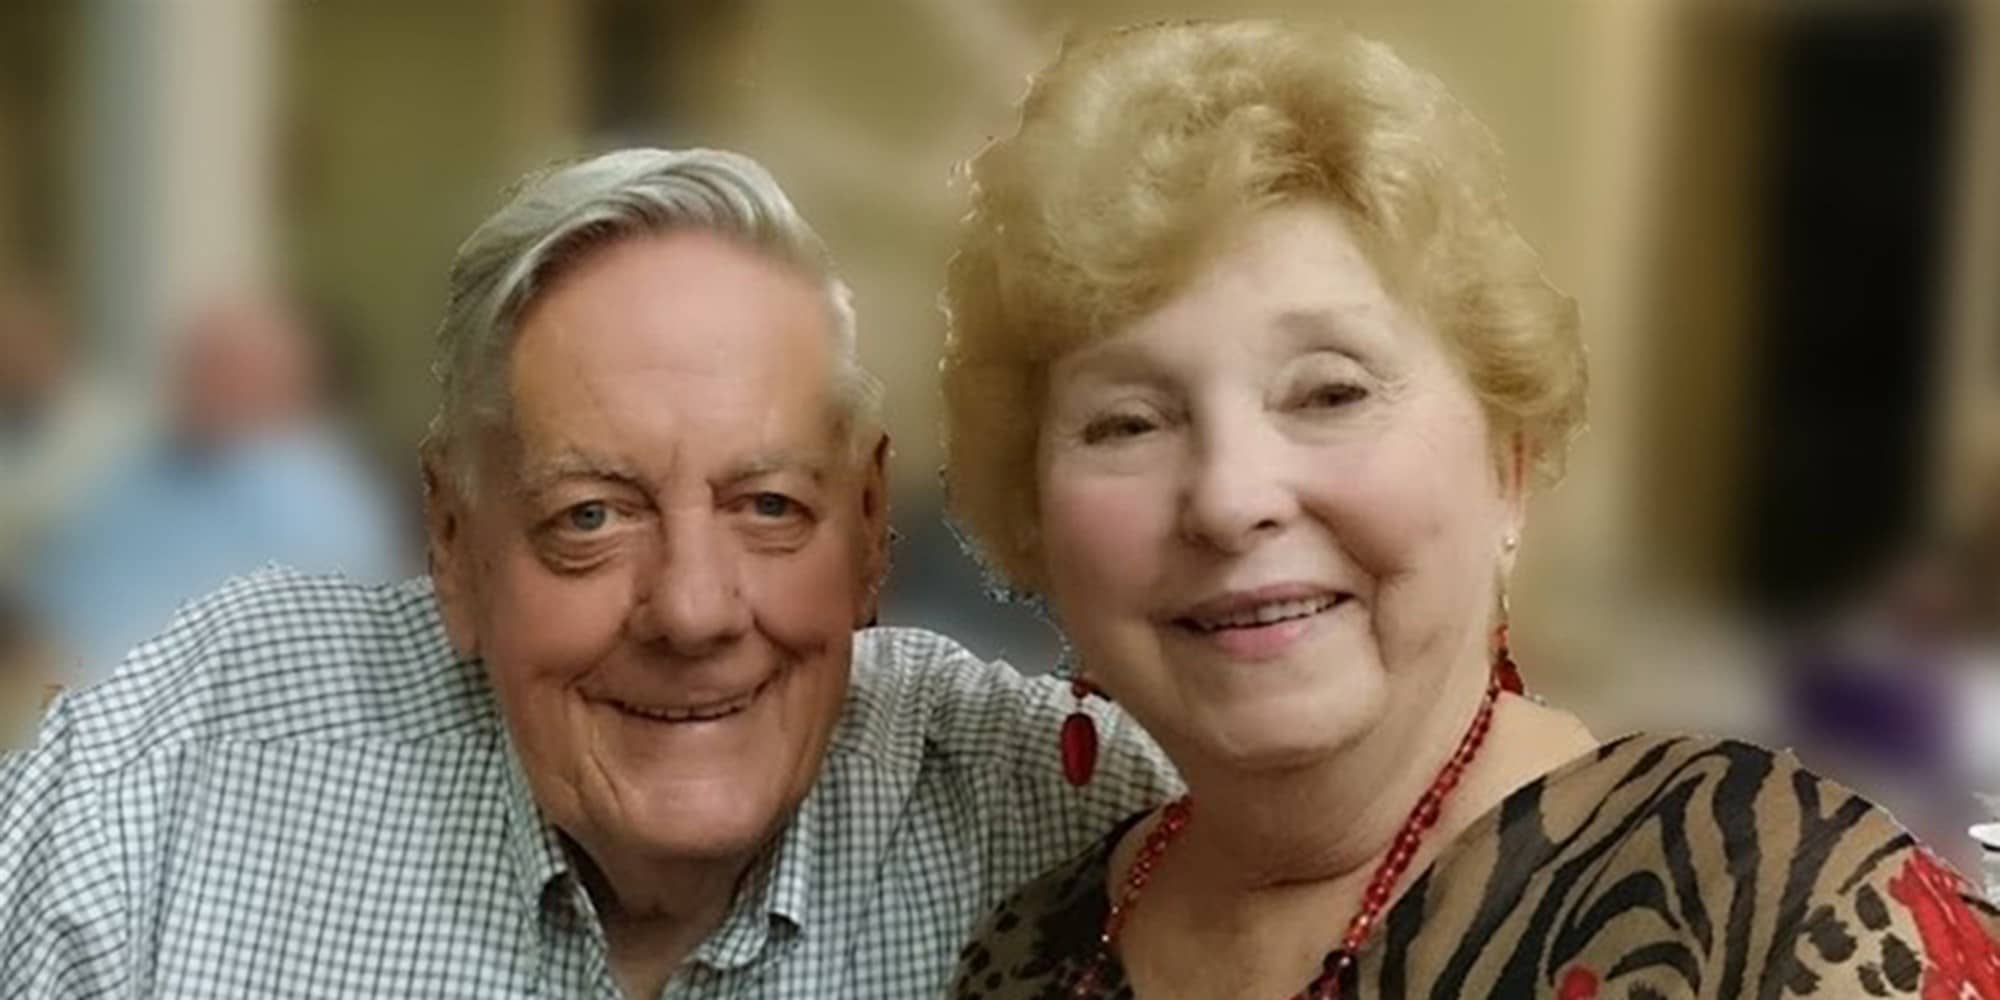 Couple Married For 61 Years Die One Day Apart From Coronavirus